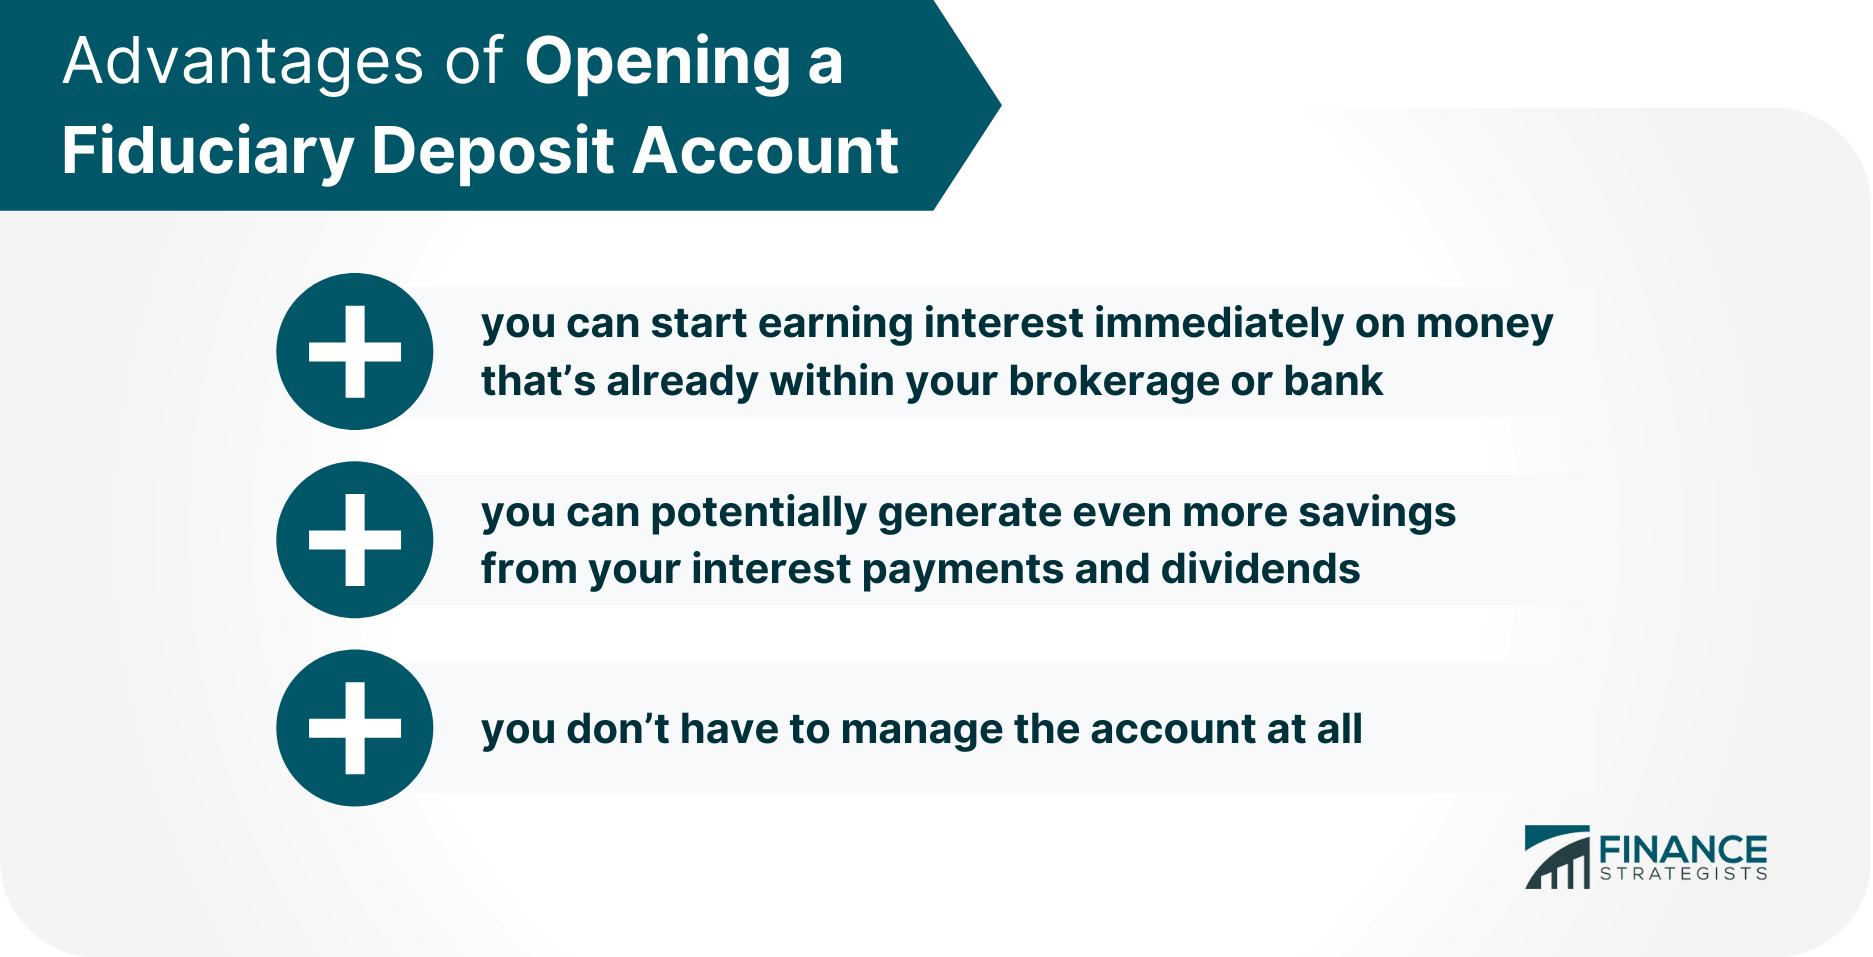 Advantages_of_Opening_a_Fiduciary_Deposit_Account